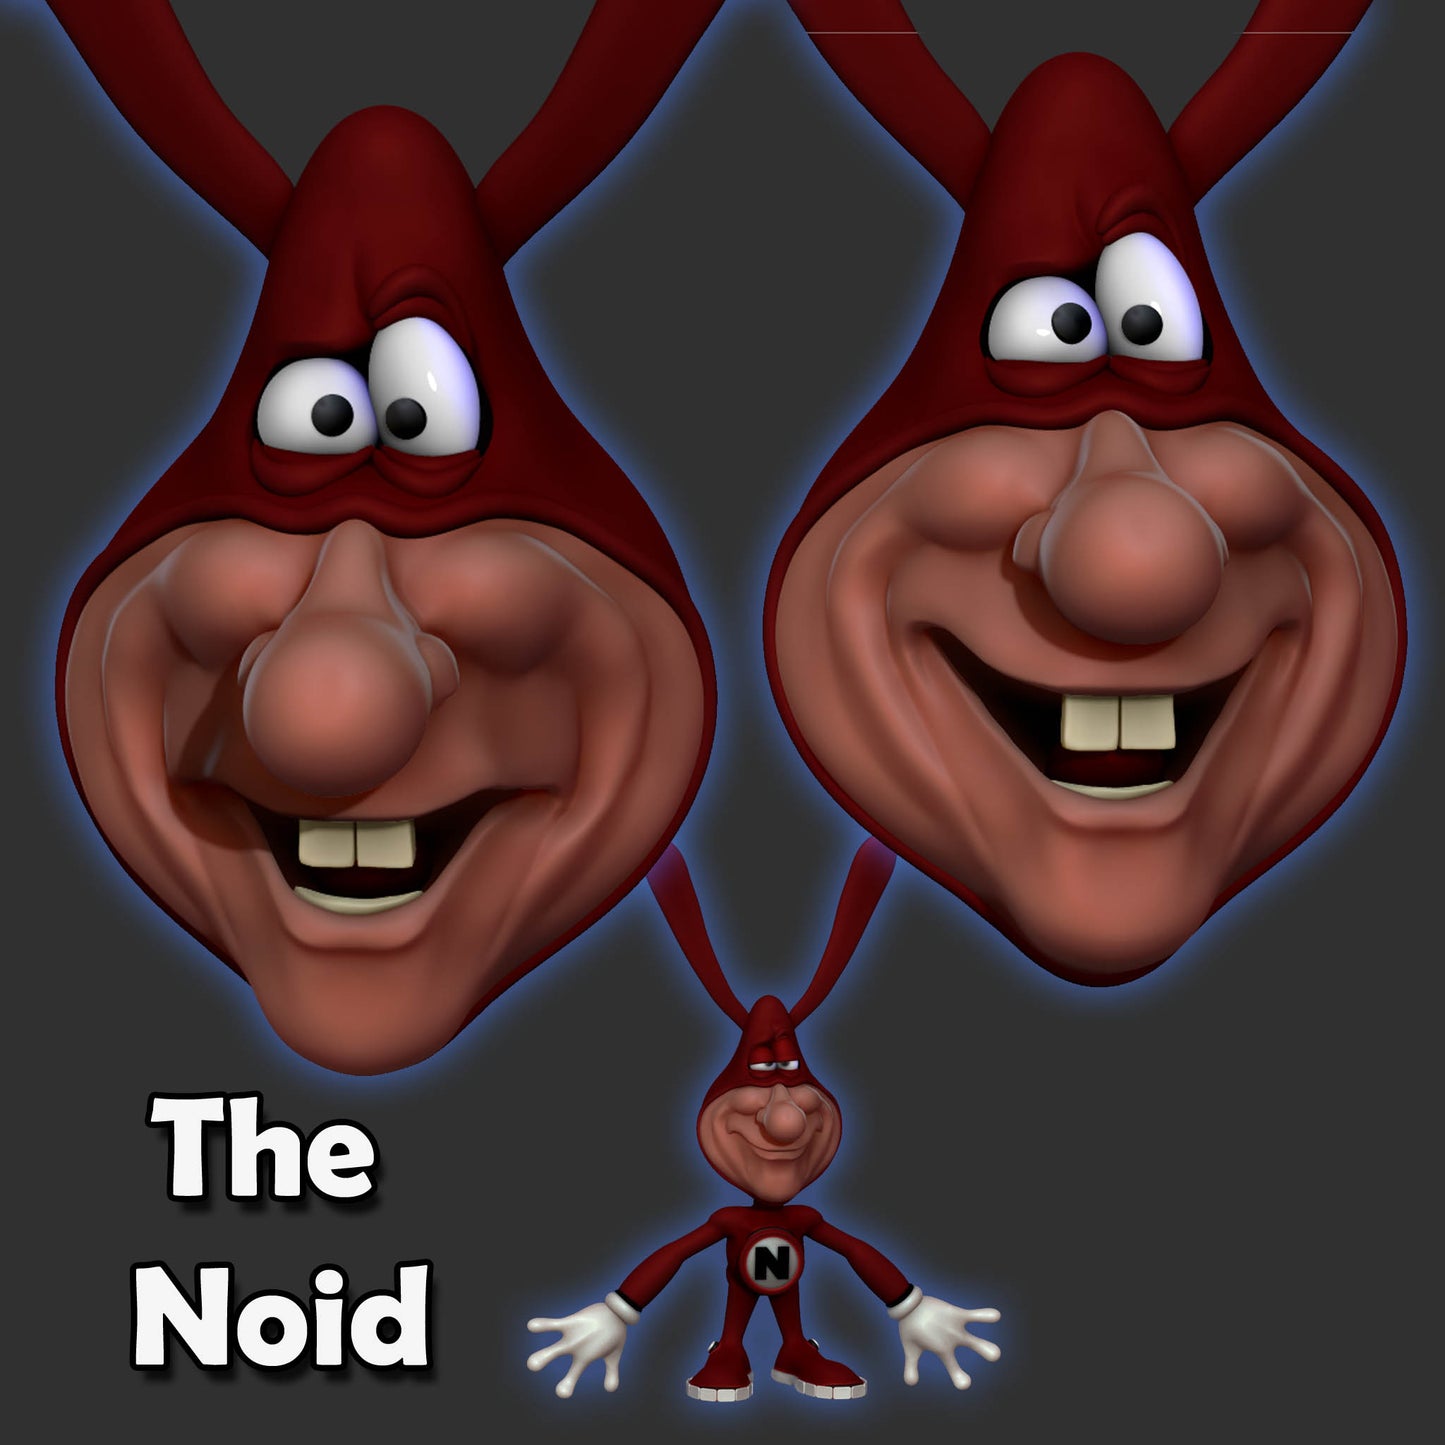 The Dominos Pizza Noid, digitally sculpted by Marc Spess